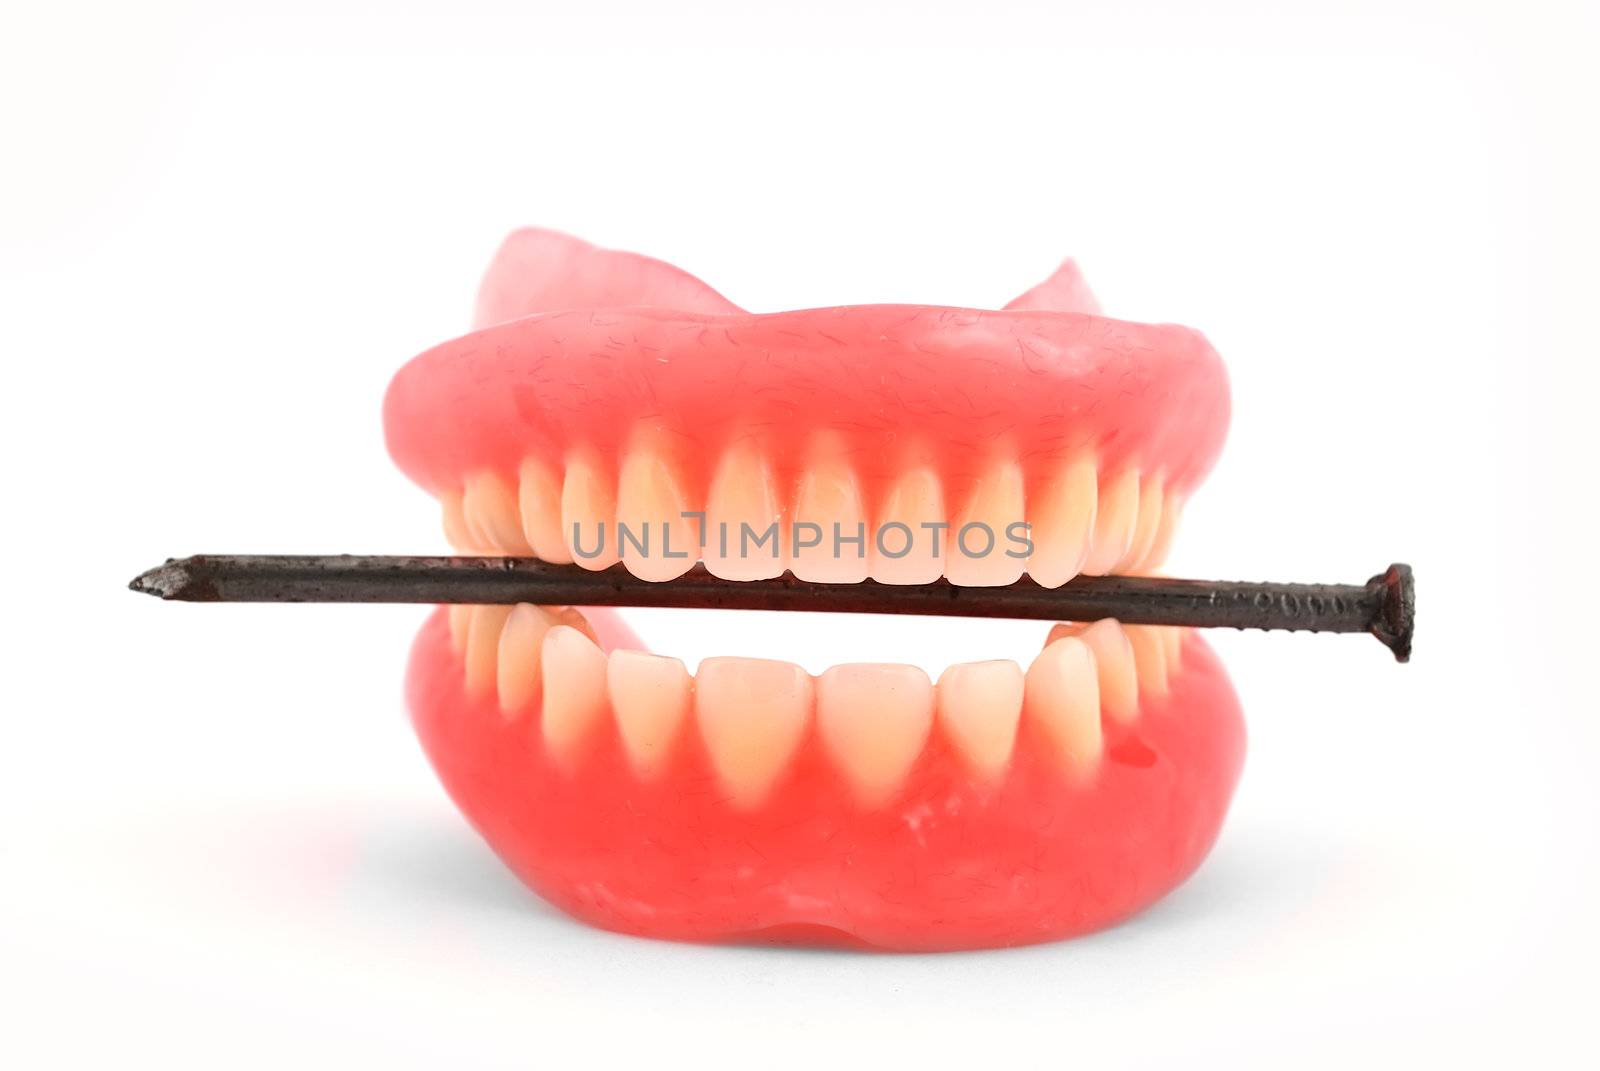 Plastic dentures and nail on a white background